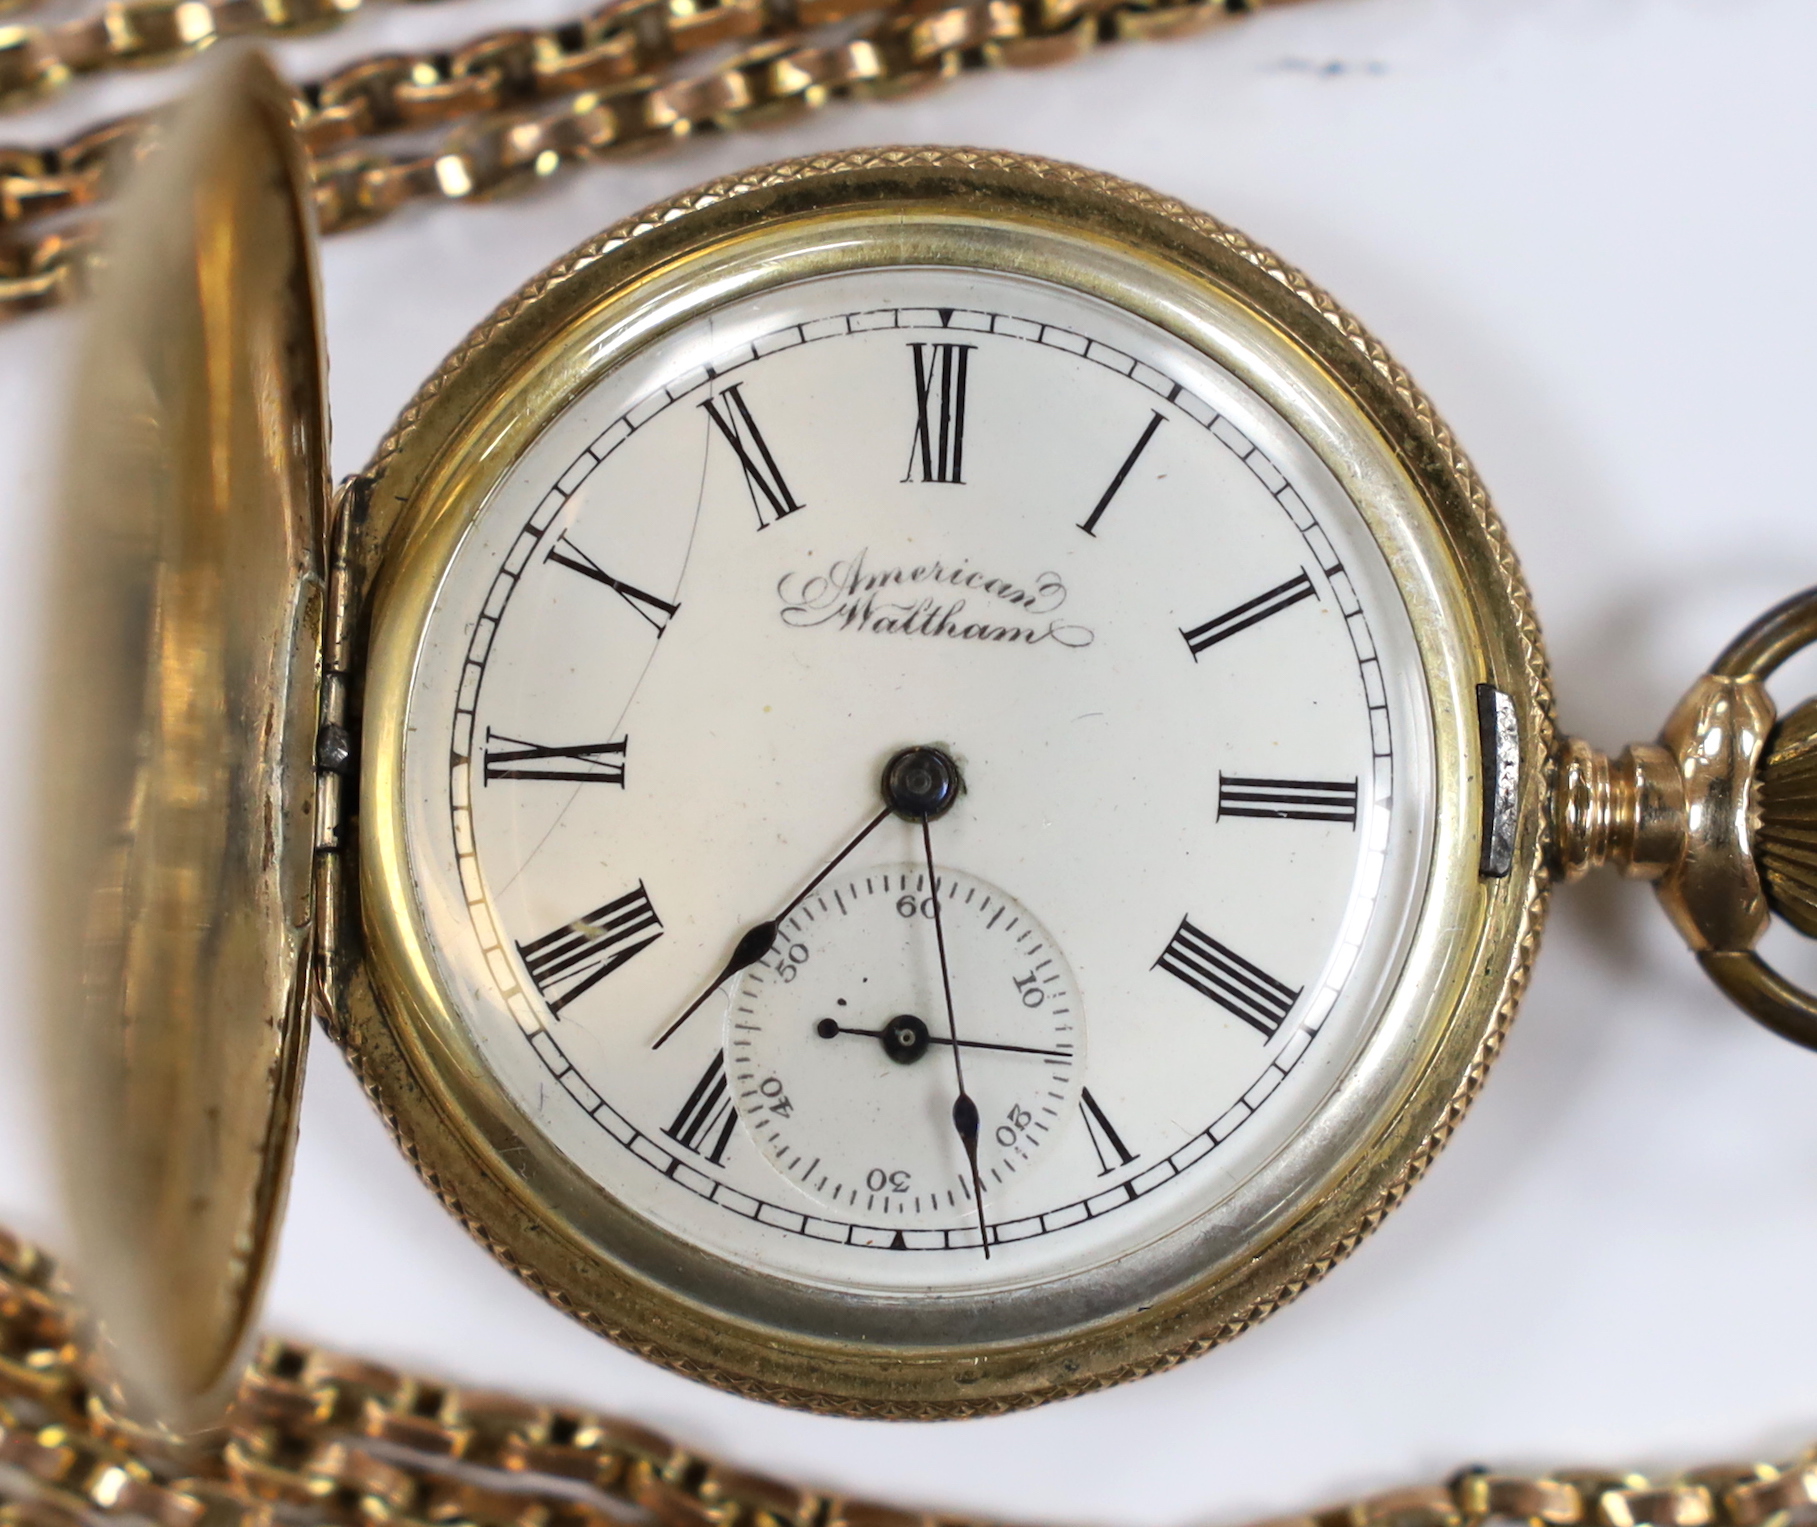 An American Waltham engraved gold plated hunter pocket watch, case diameter 42mm, together with a 9ct double strand chain, 39cm, chain 29.6 grams.